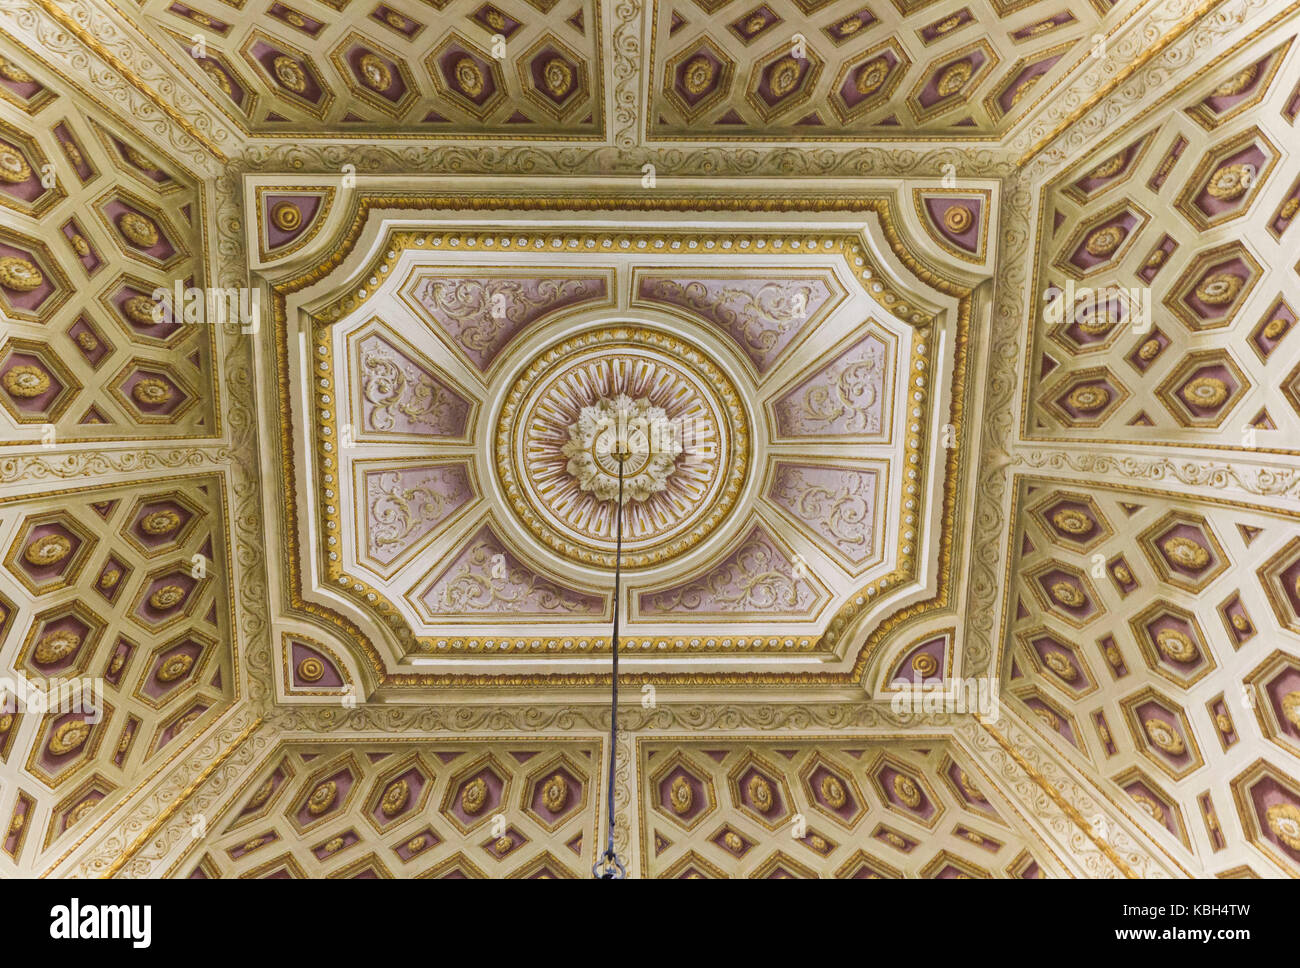 Caserta, Italy, August 14 2014: Beautiful ceiling inside the rooms of Reggia di Caserta, a Unesco world heritage site near Naples Stock Photo